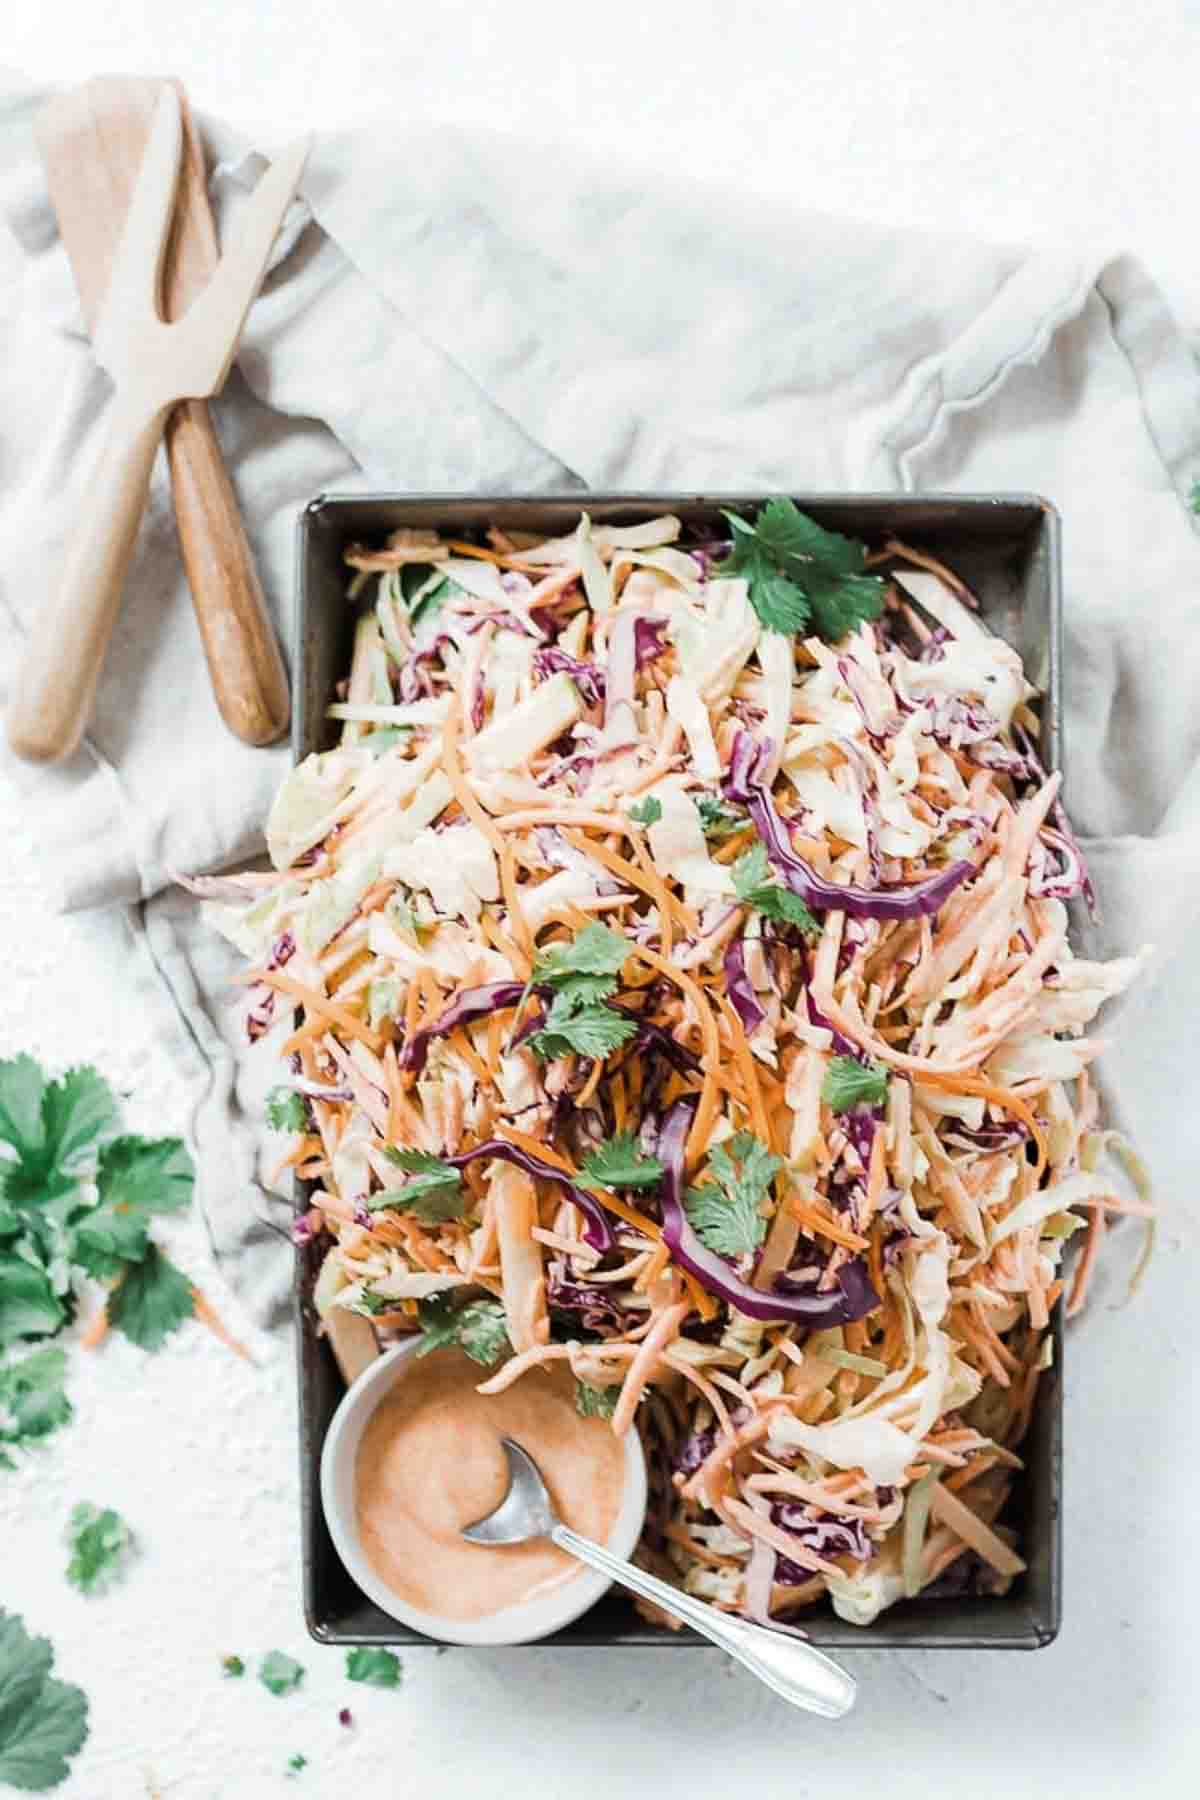 Homemade apple cabbage slaw recipe in a metal cake pan, dressing to the side.